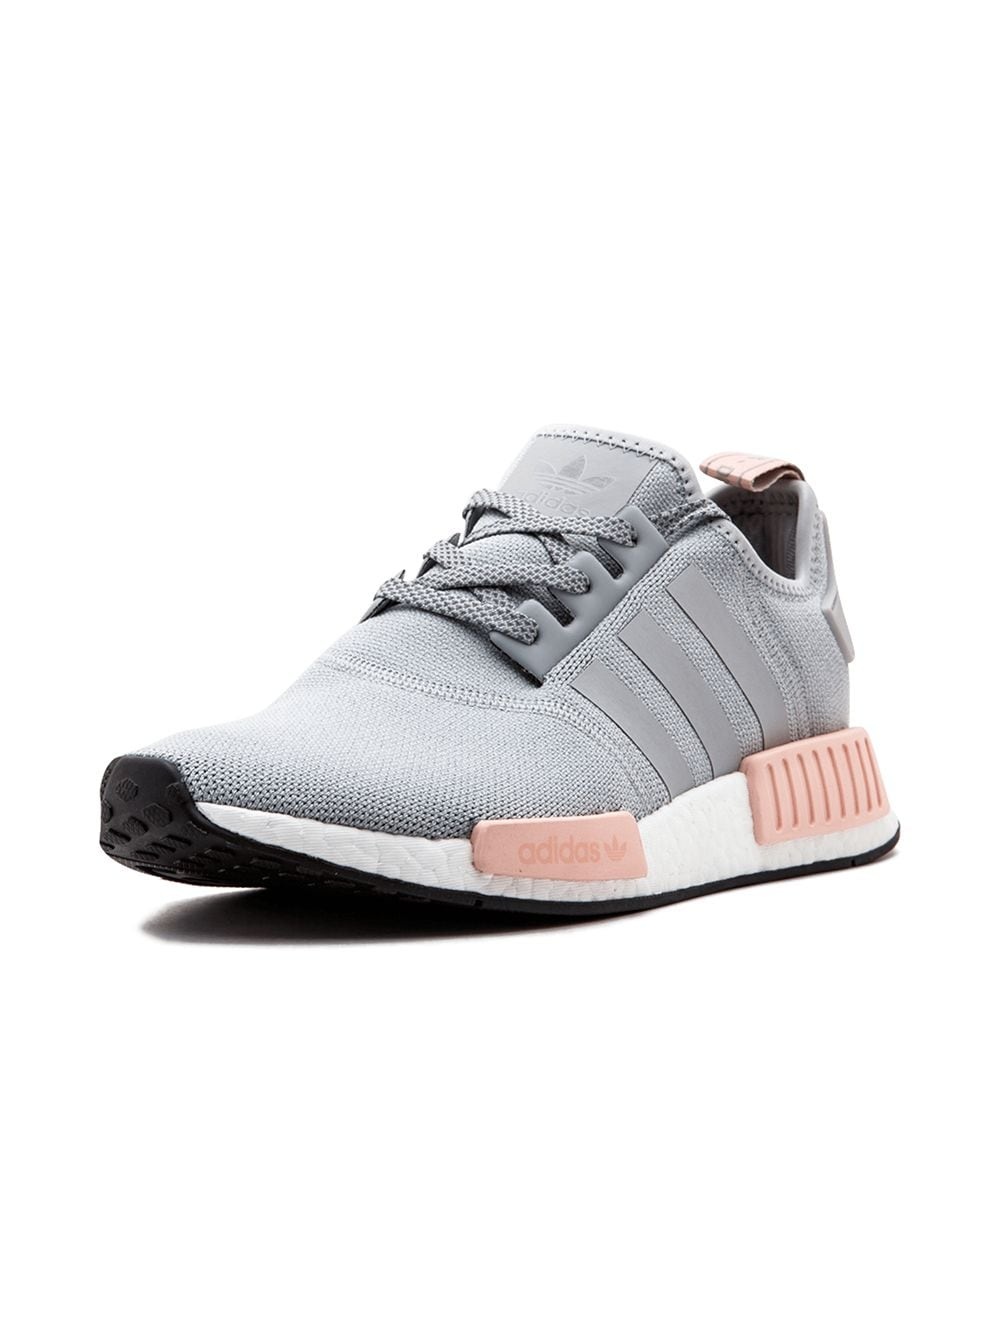 NMD_R1 W sneakers - 4